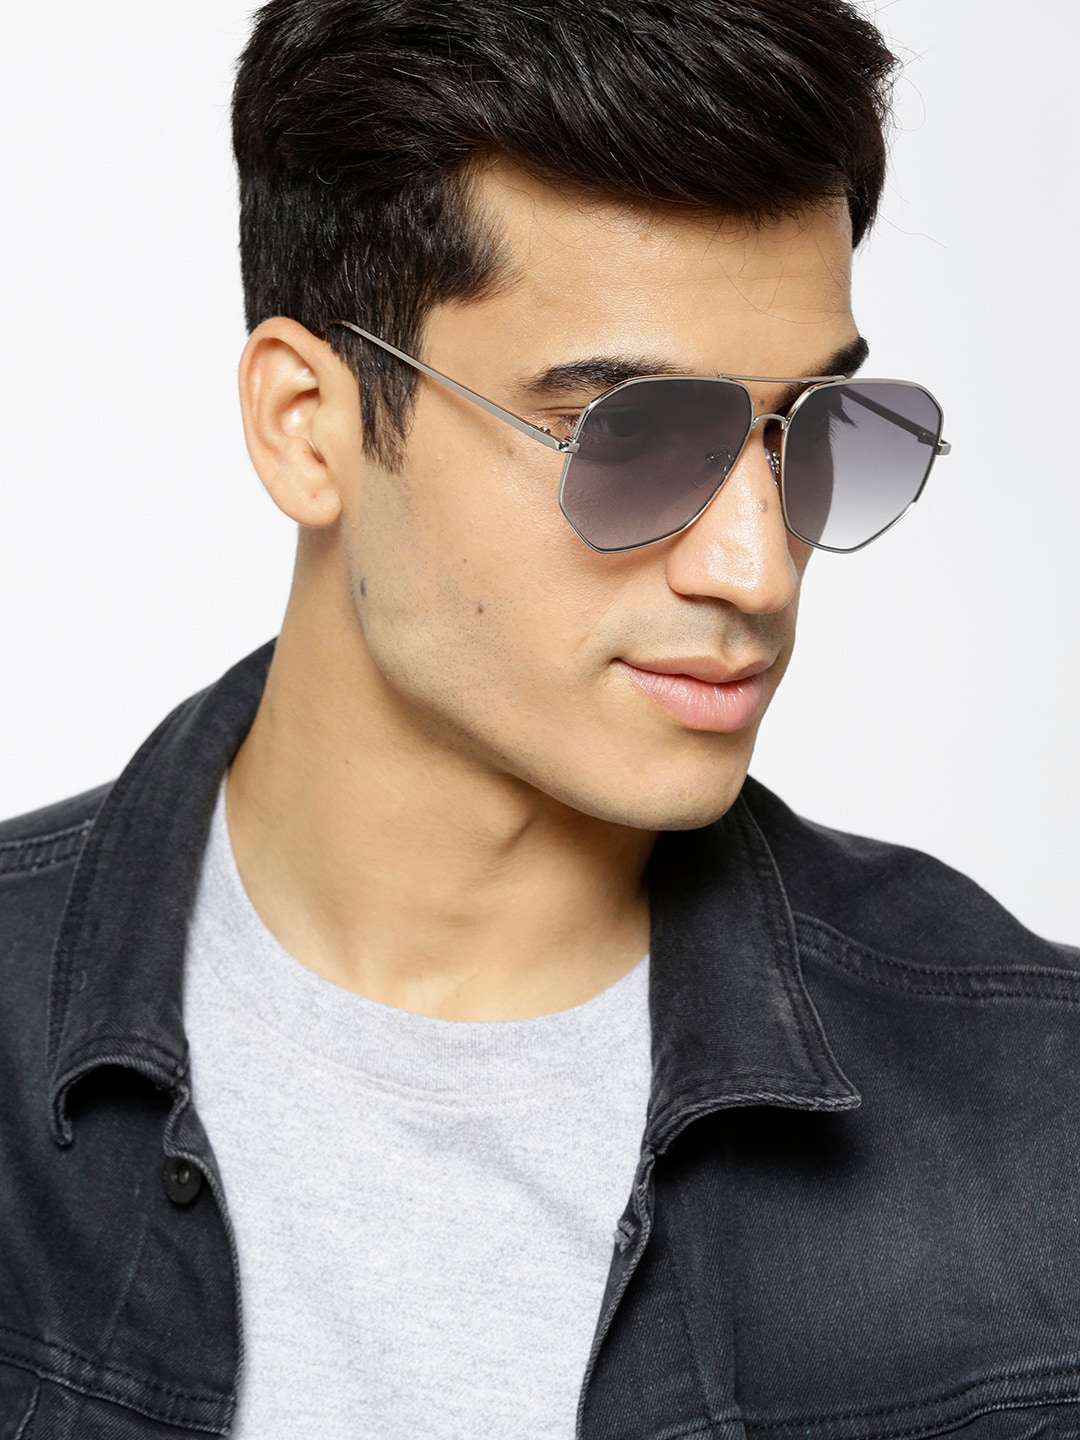 Roadster Unisex Oval Sunglasses MFB-PN-PS-T9646 Price in India